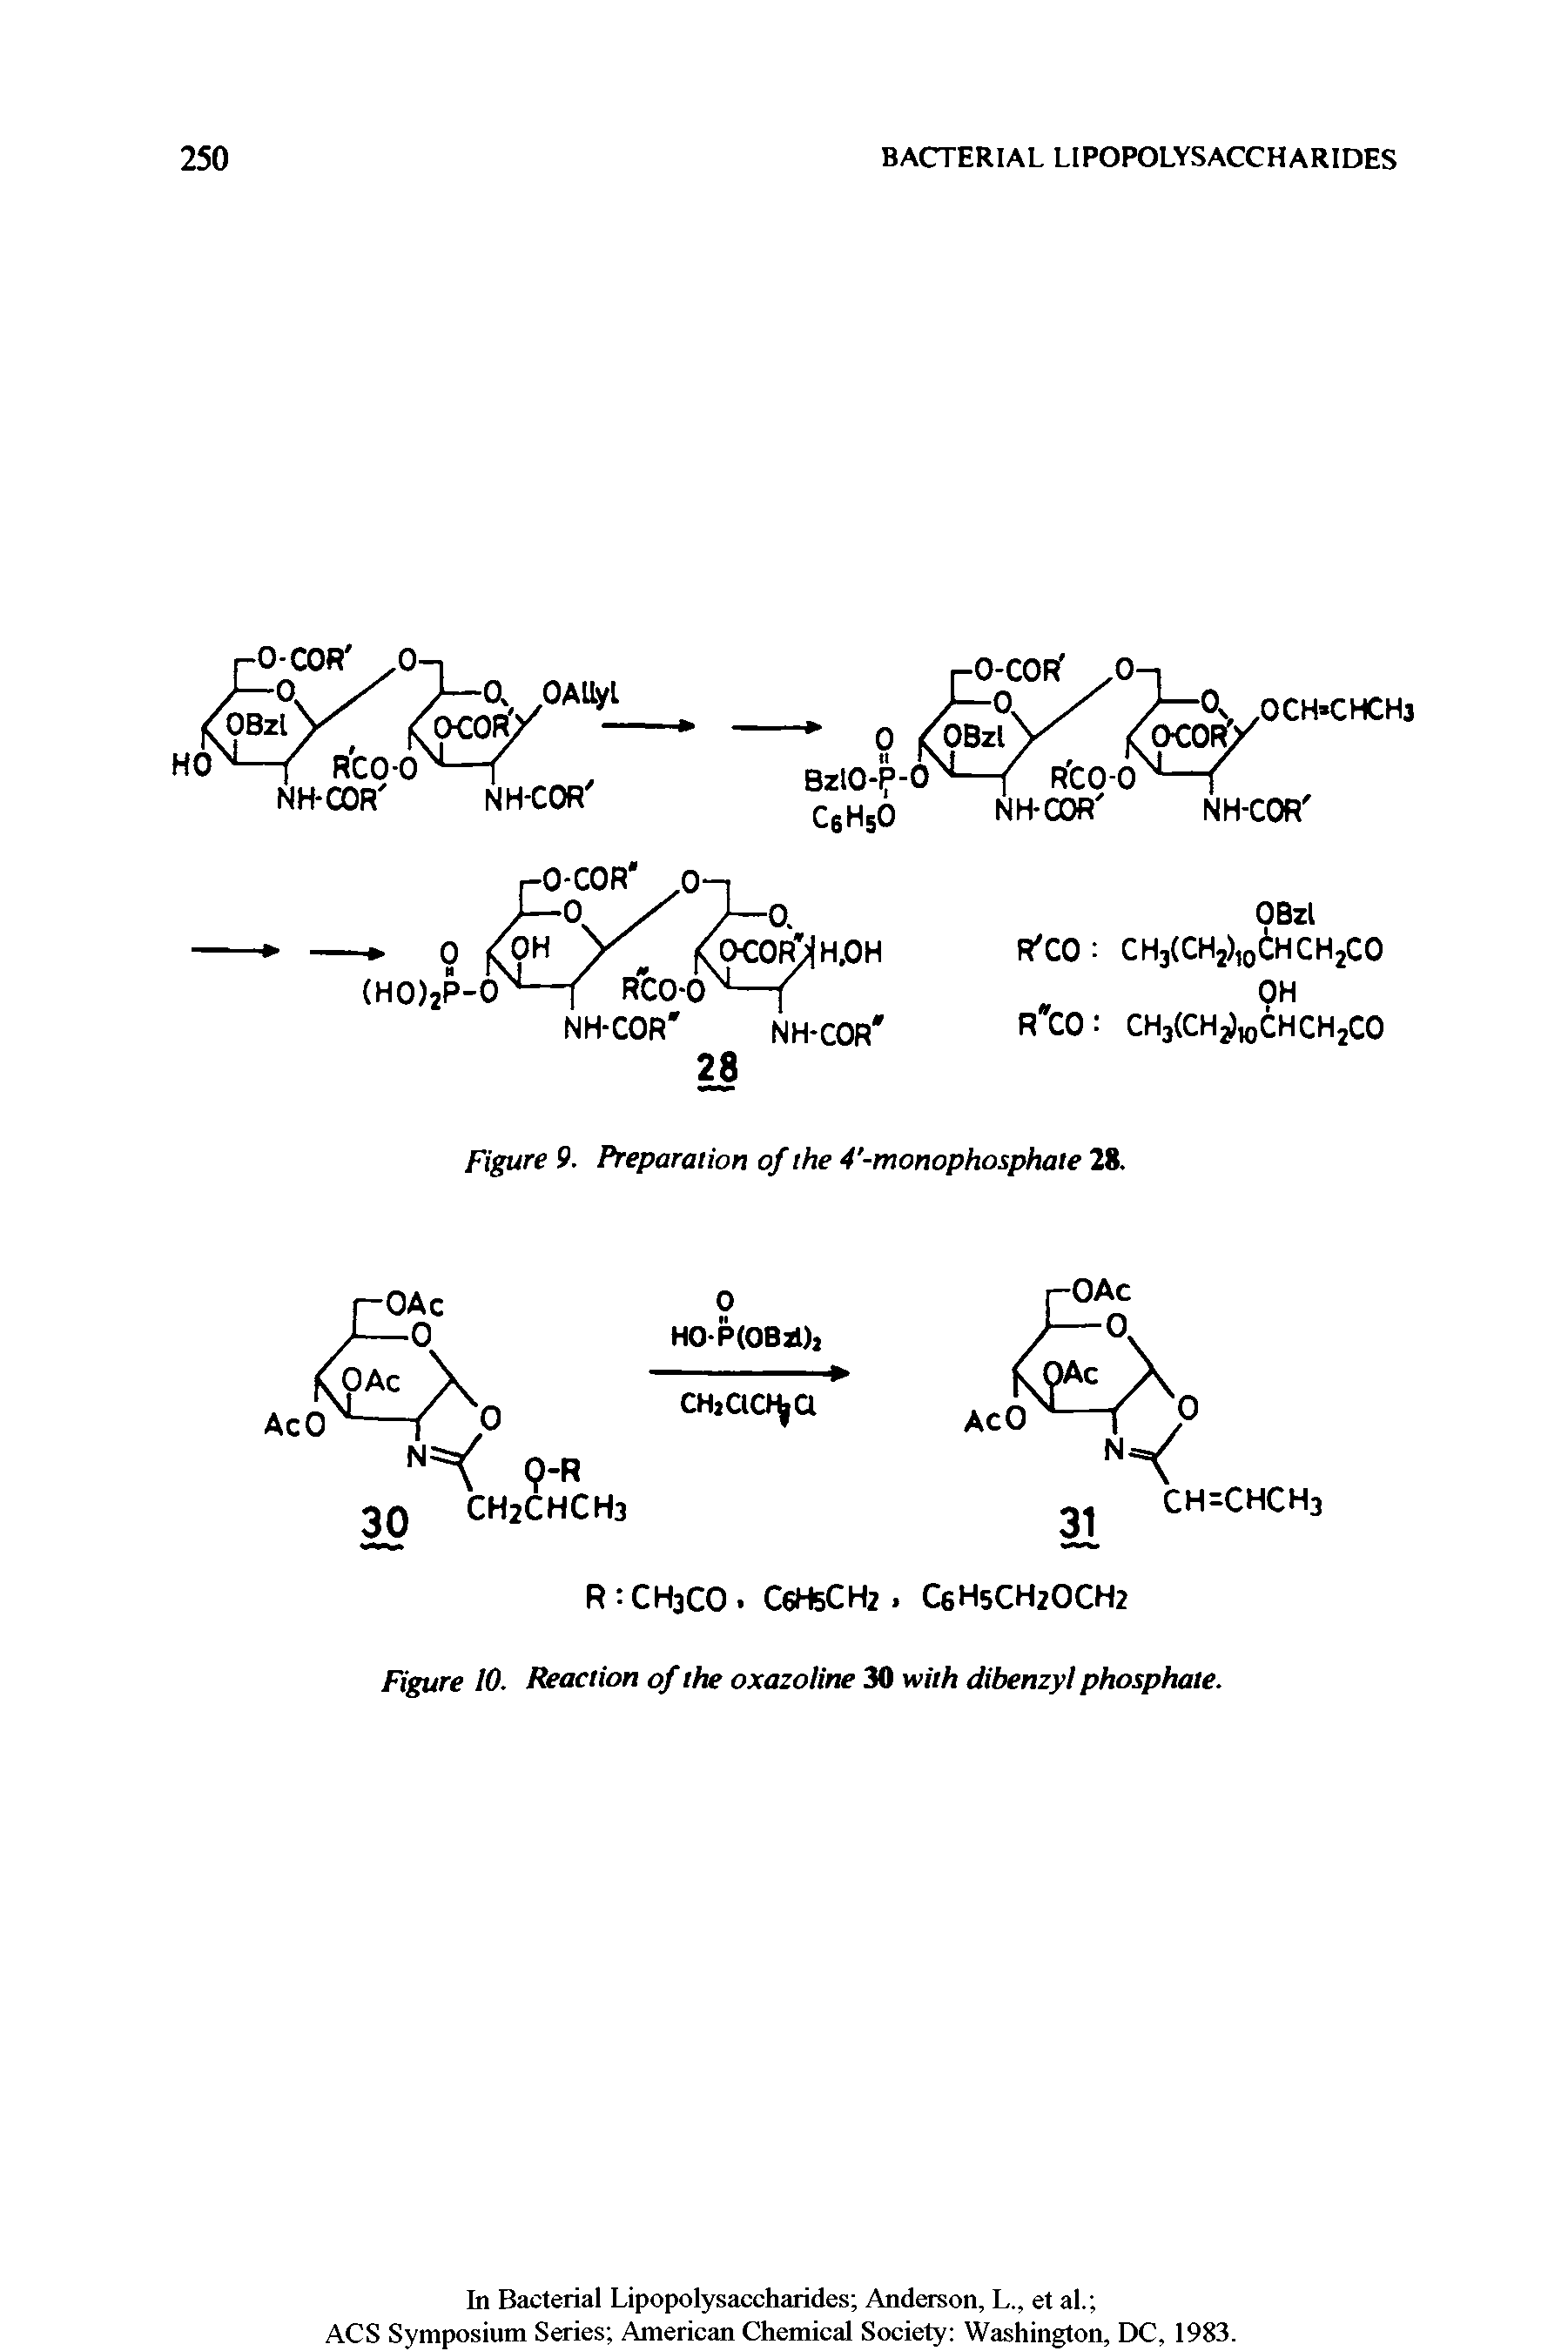 Figure 10. Reaction of the oxazoline 30 with dibenzyl phosphate.